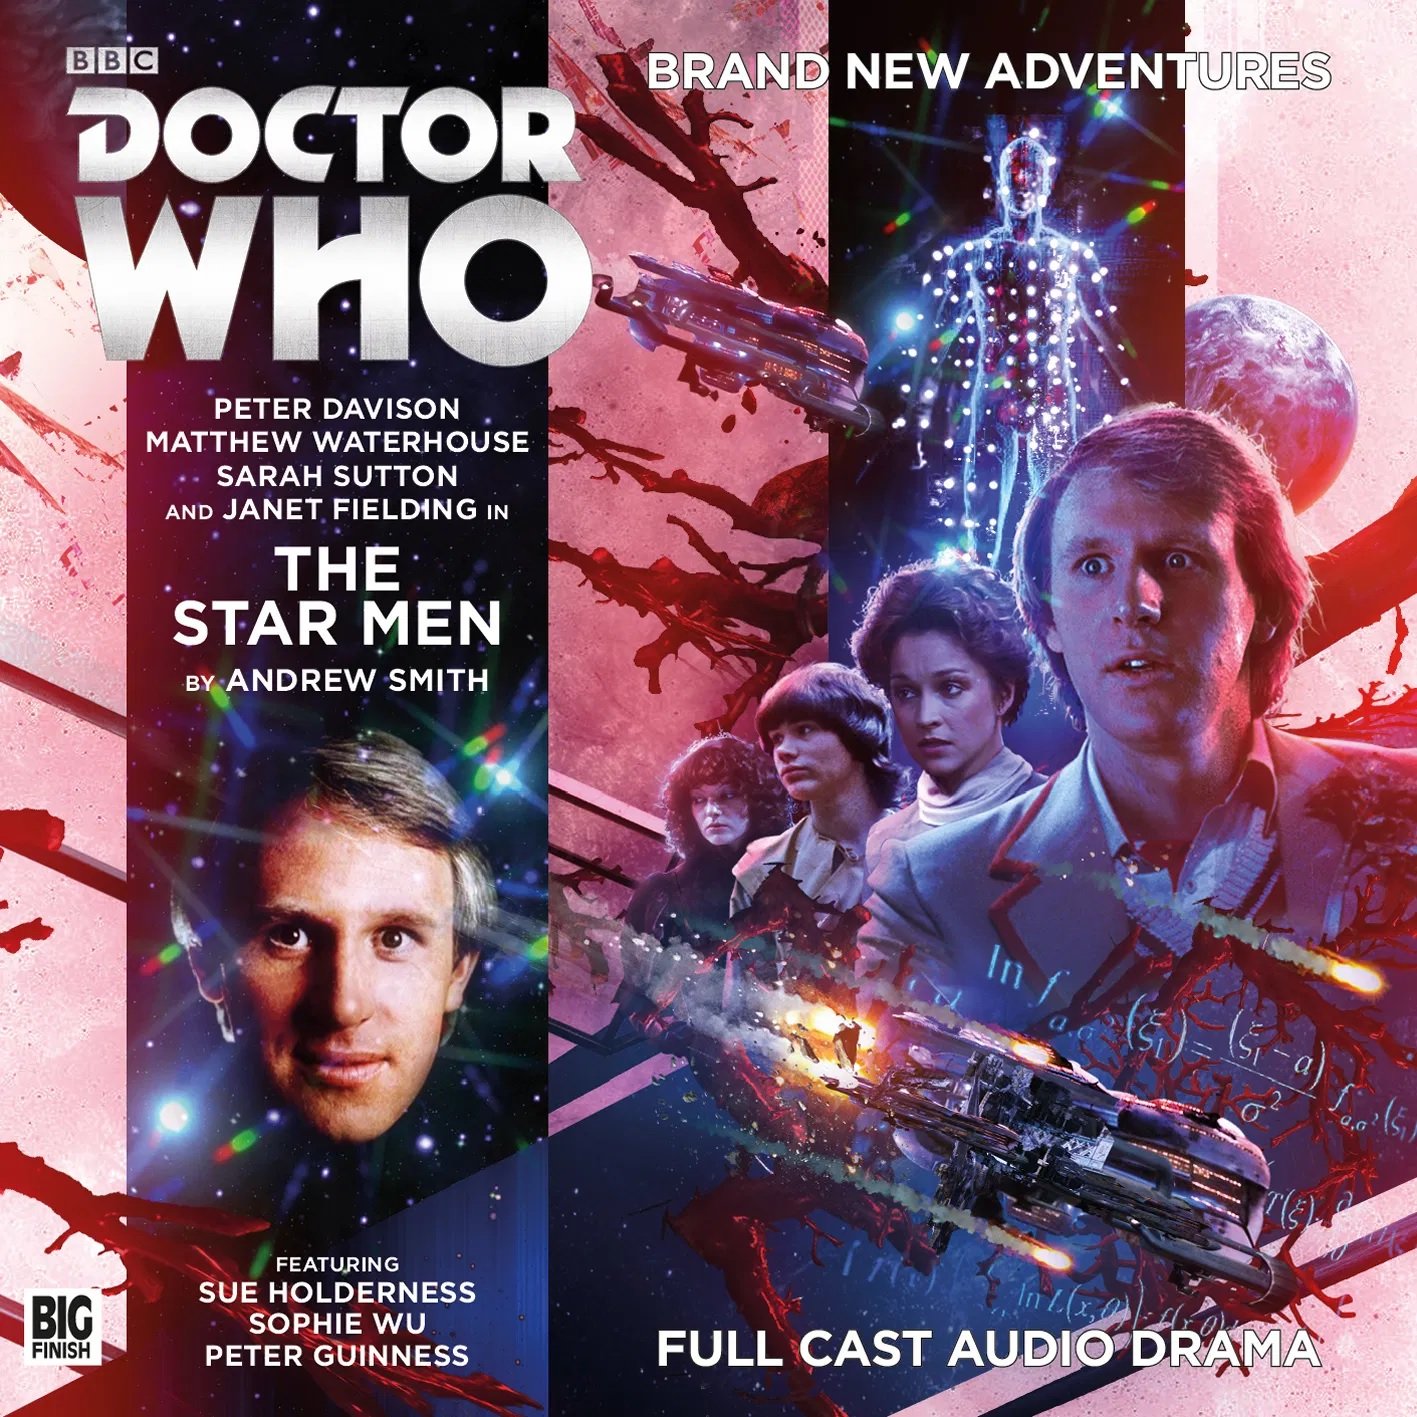 Reviewed: Big Finish’s Doctor Who – The Star Men